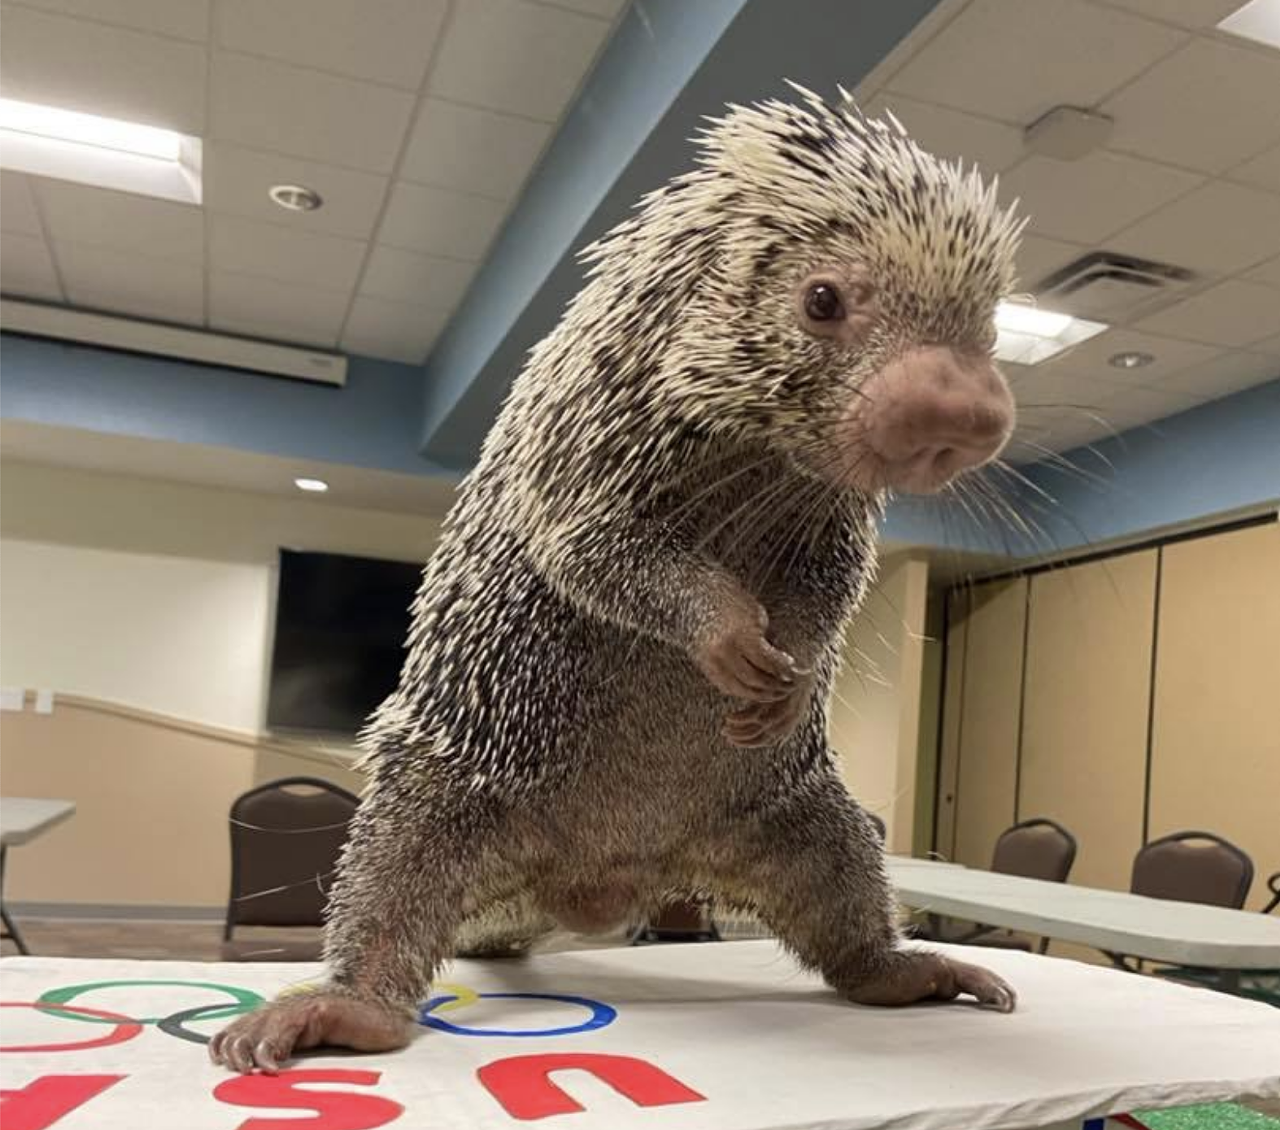 CityBeat favorite Rico the porcupine showing off his skateboarding skills.